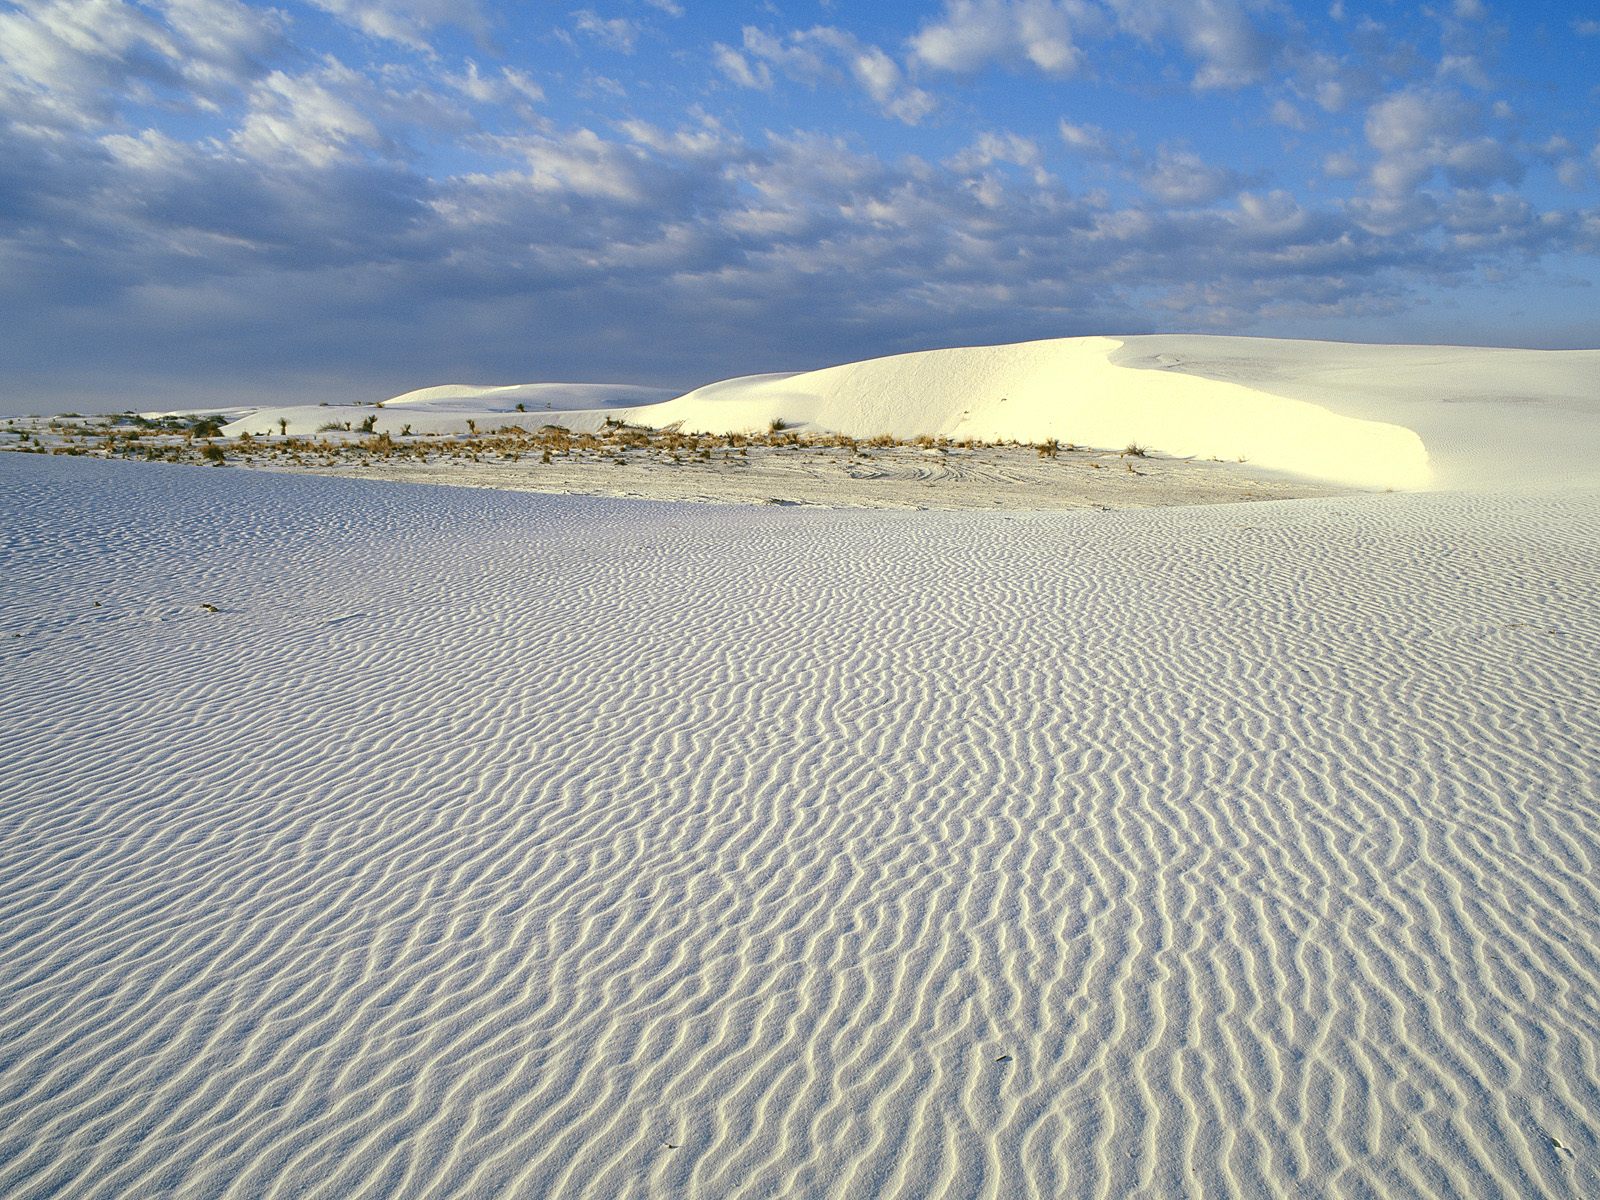 Gypsum Sand Dunes, White Sands National Monument, New Mexico HD Wallpaper